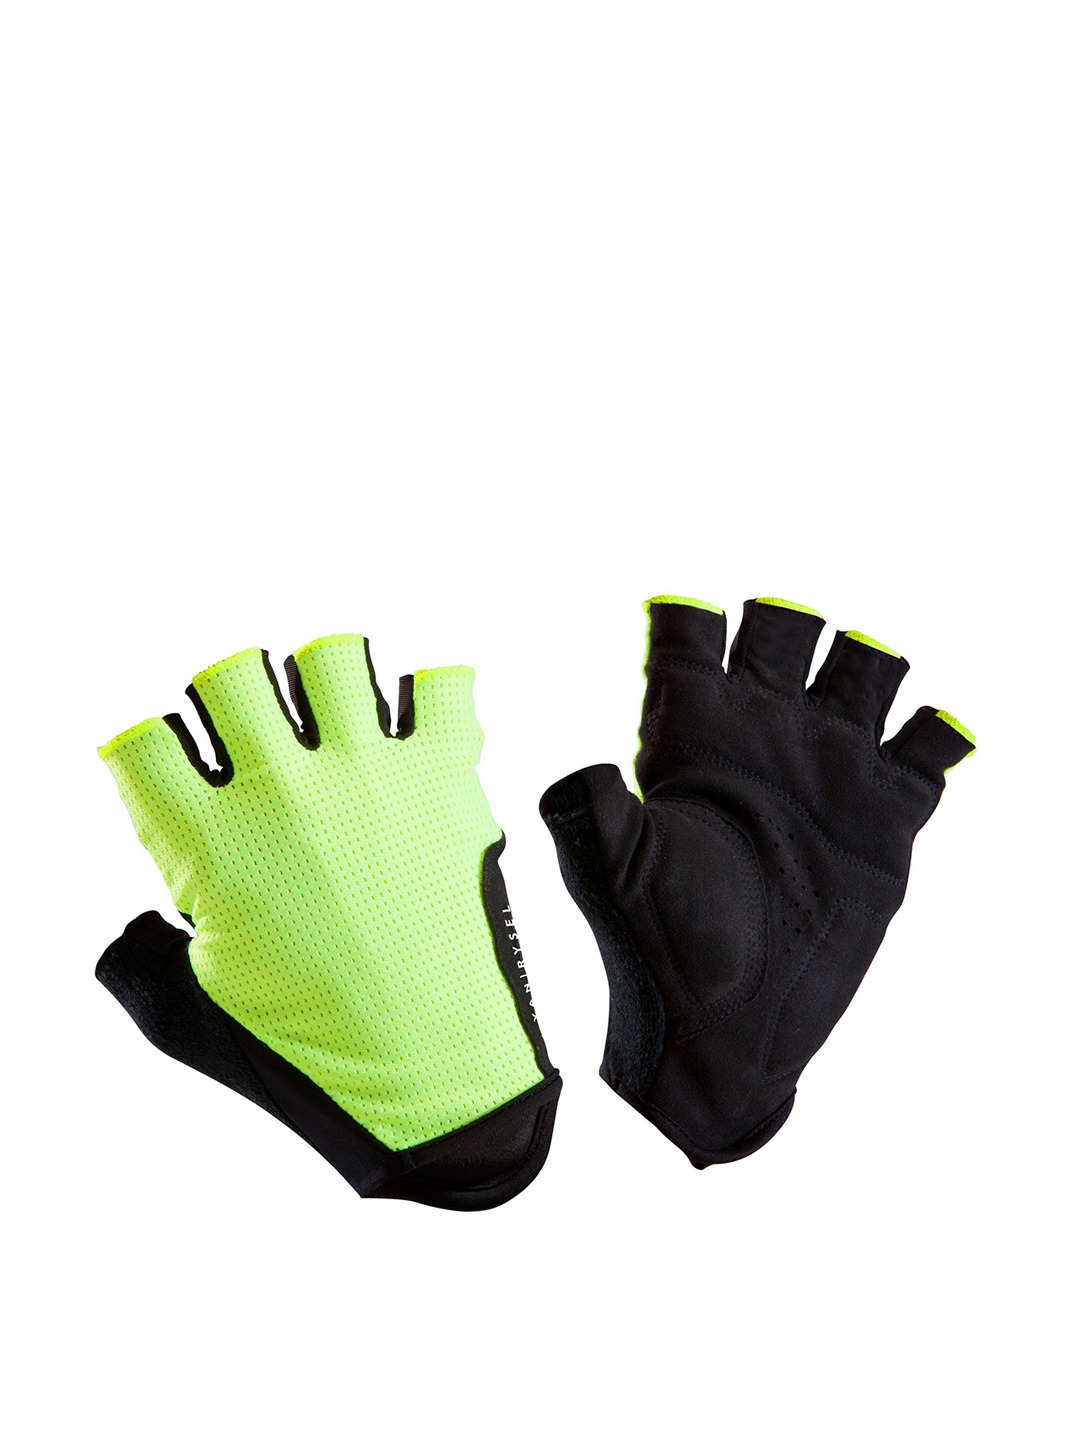 Accessories Gloves | TRIBAN By Decathlon Adults Fluorescent Green & Black Solid Cycling Gloves - BR48397